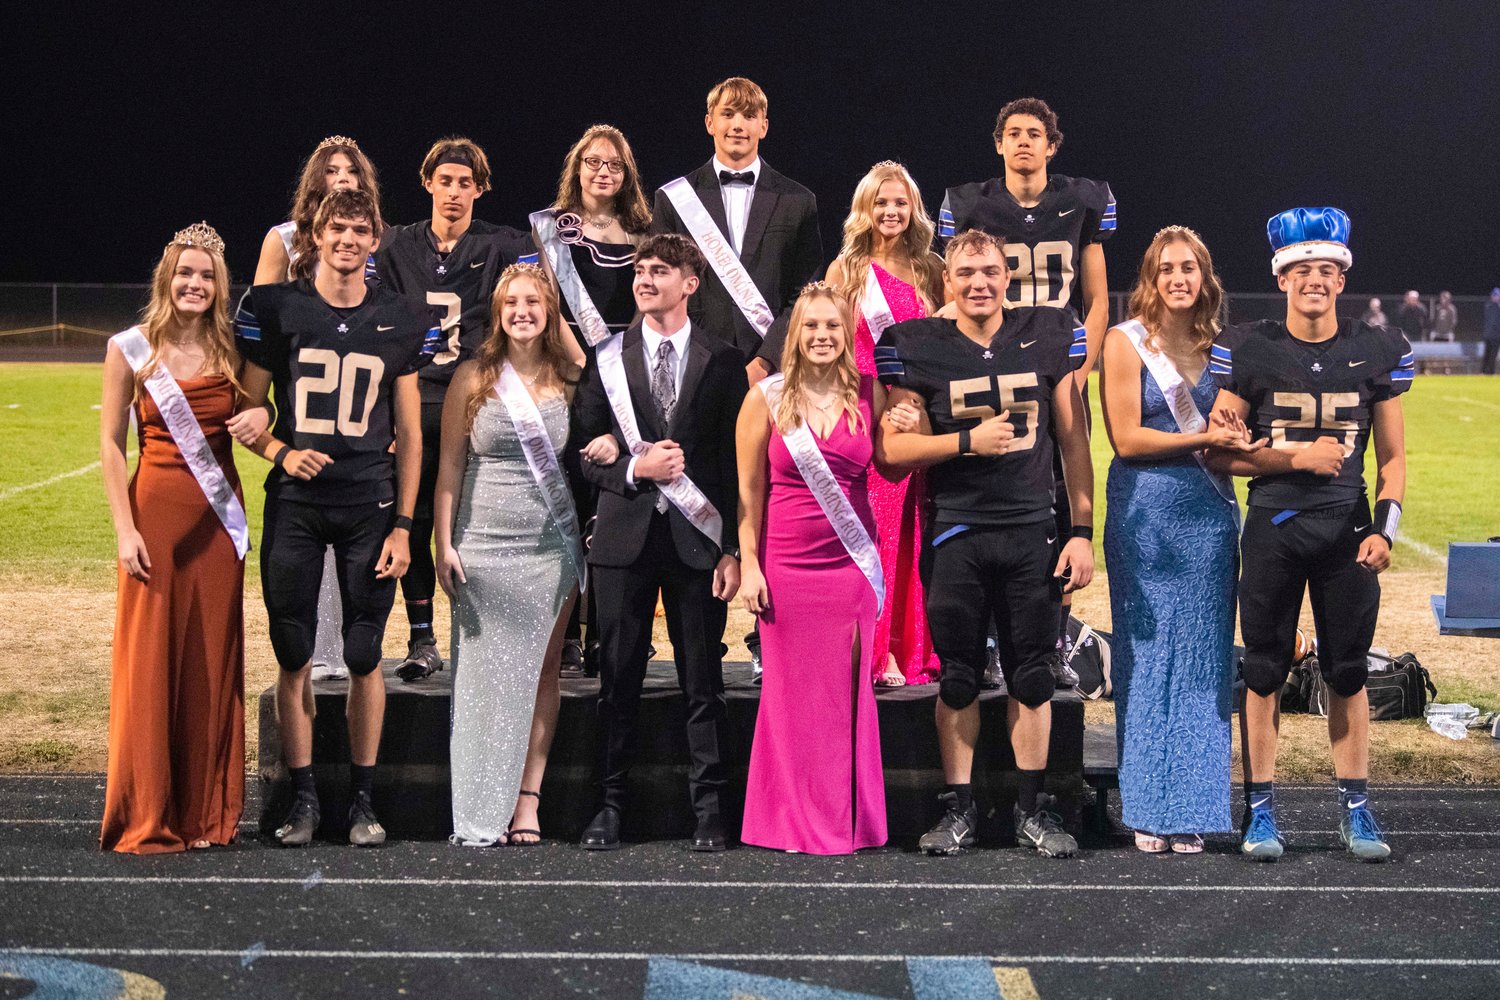 Adna High School homecoming royalty poses for a photo at Pirate Stadium Friday night during a football game against Toledo.